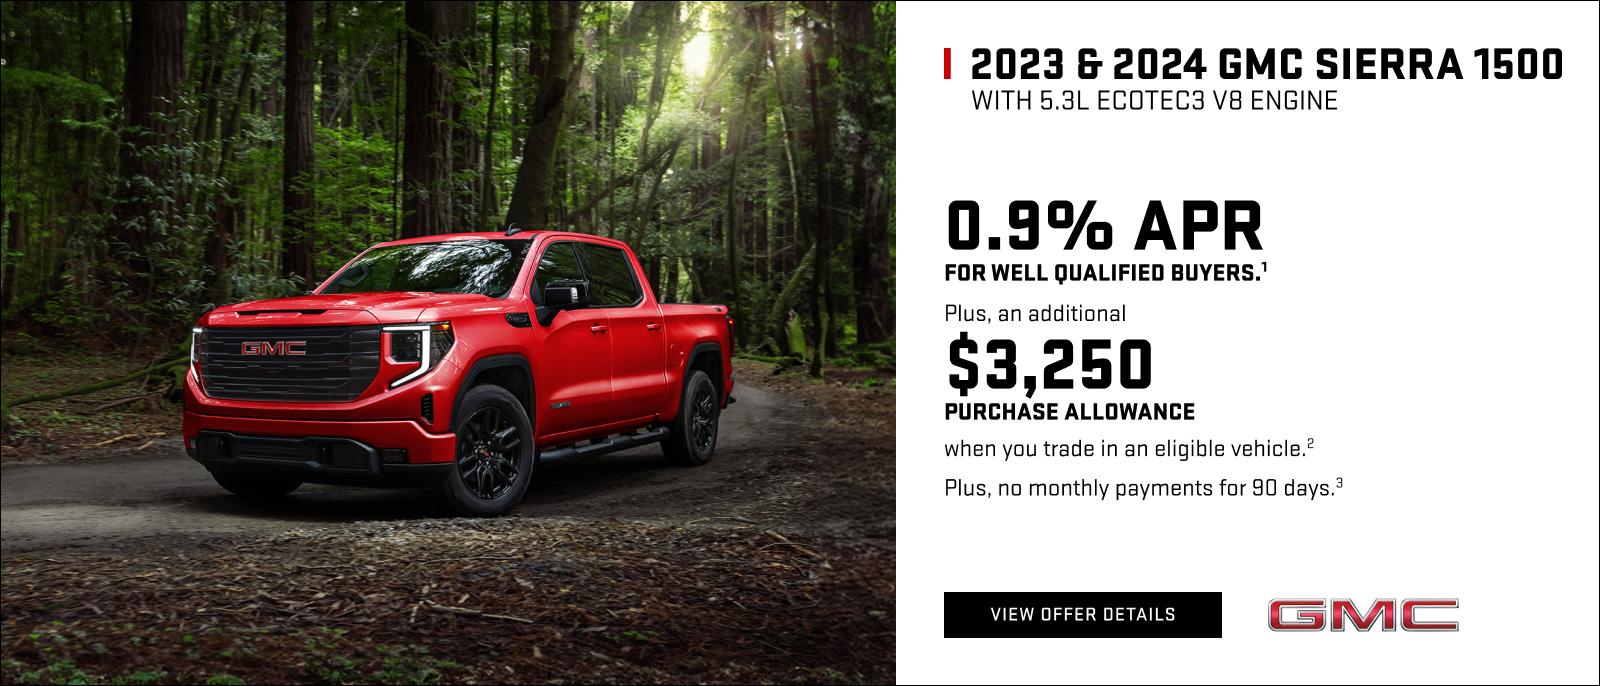 0.9% APR for well-qualified buyers.1

Plus, an additional $3,250 PURCHASE ALLOWANCE when you trade in an eligible vehicle.2

PLUS, NO MONTHLY PAYMENTS FOR 90 DAYS. 3